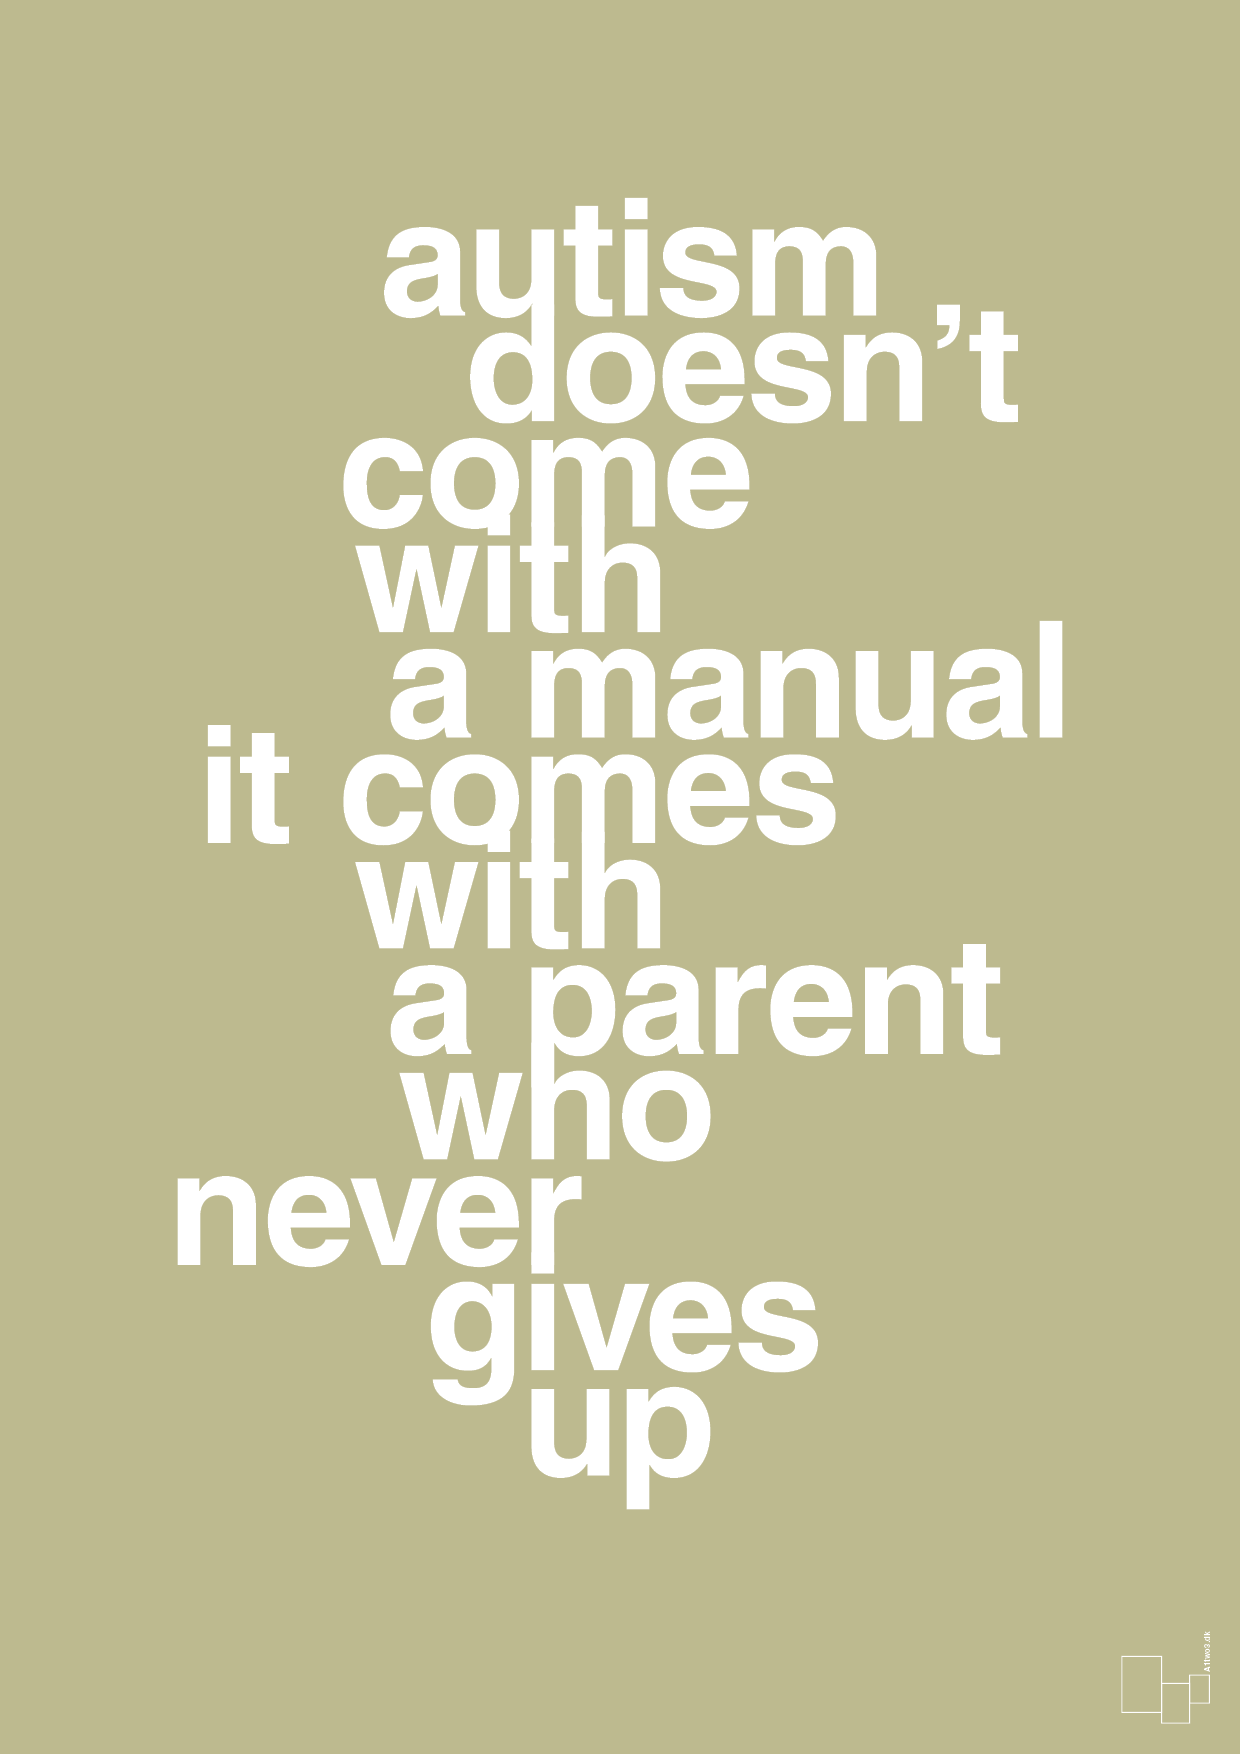 autism doesnt come with a manual it comes with a parent who never gives up - Plakat med Samfund i Back to Nature